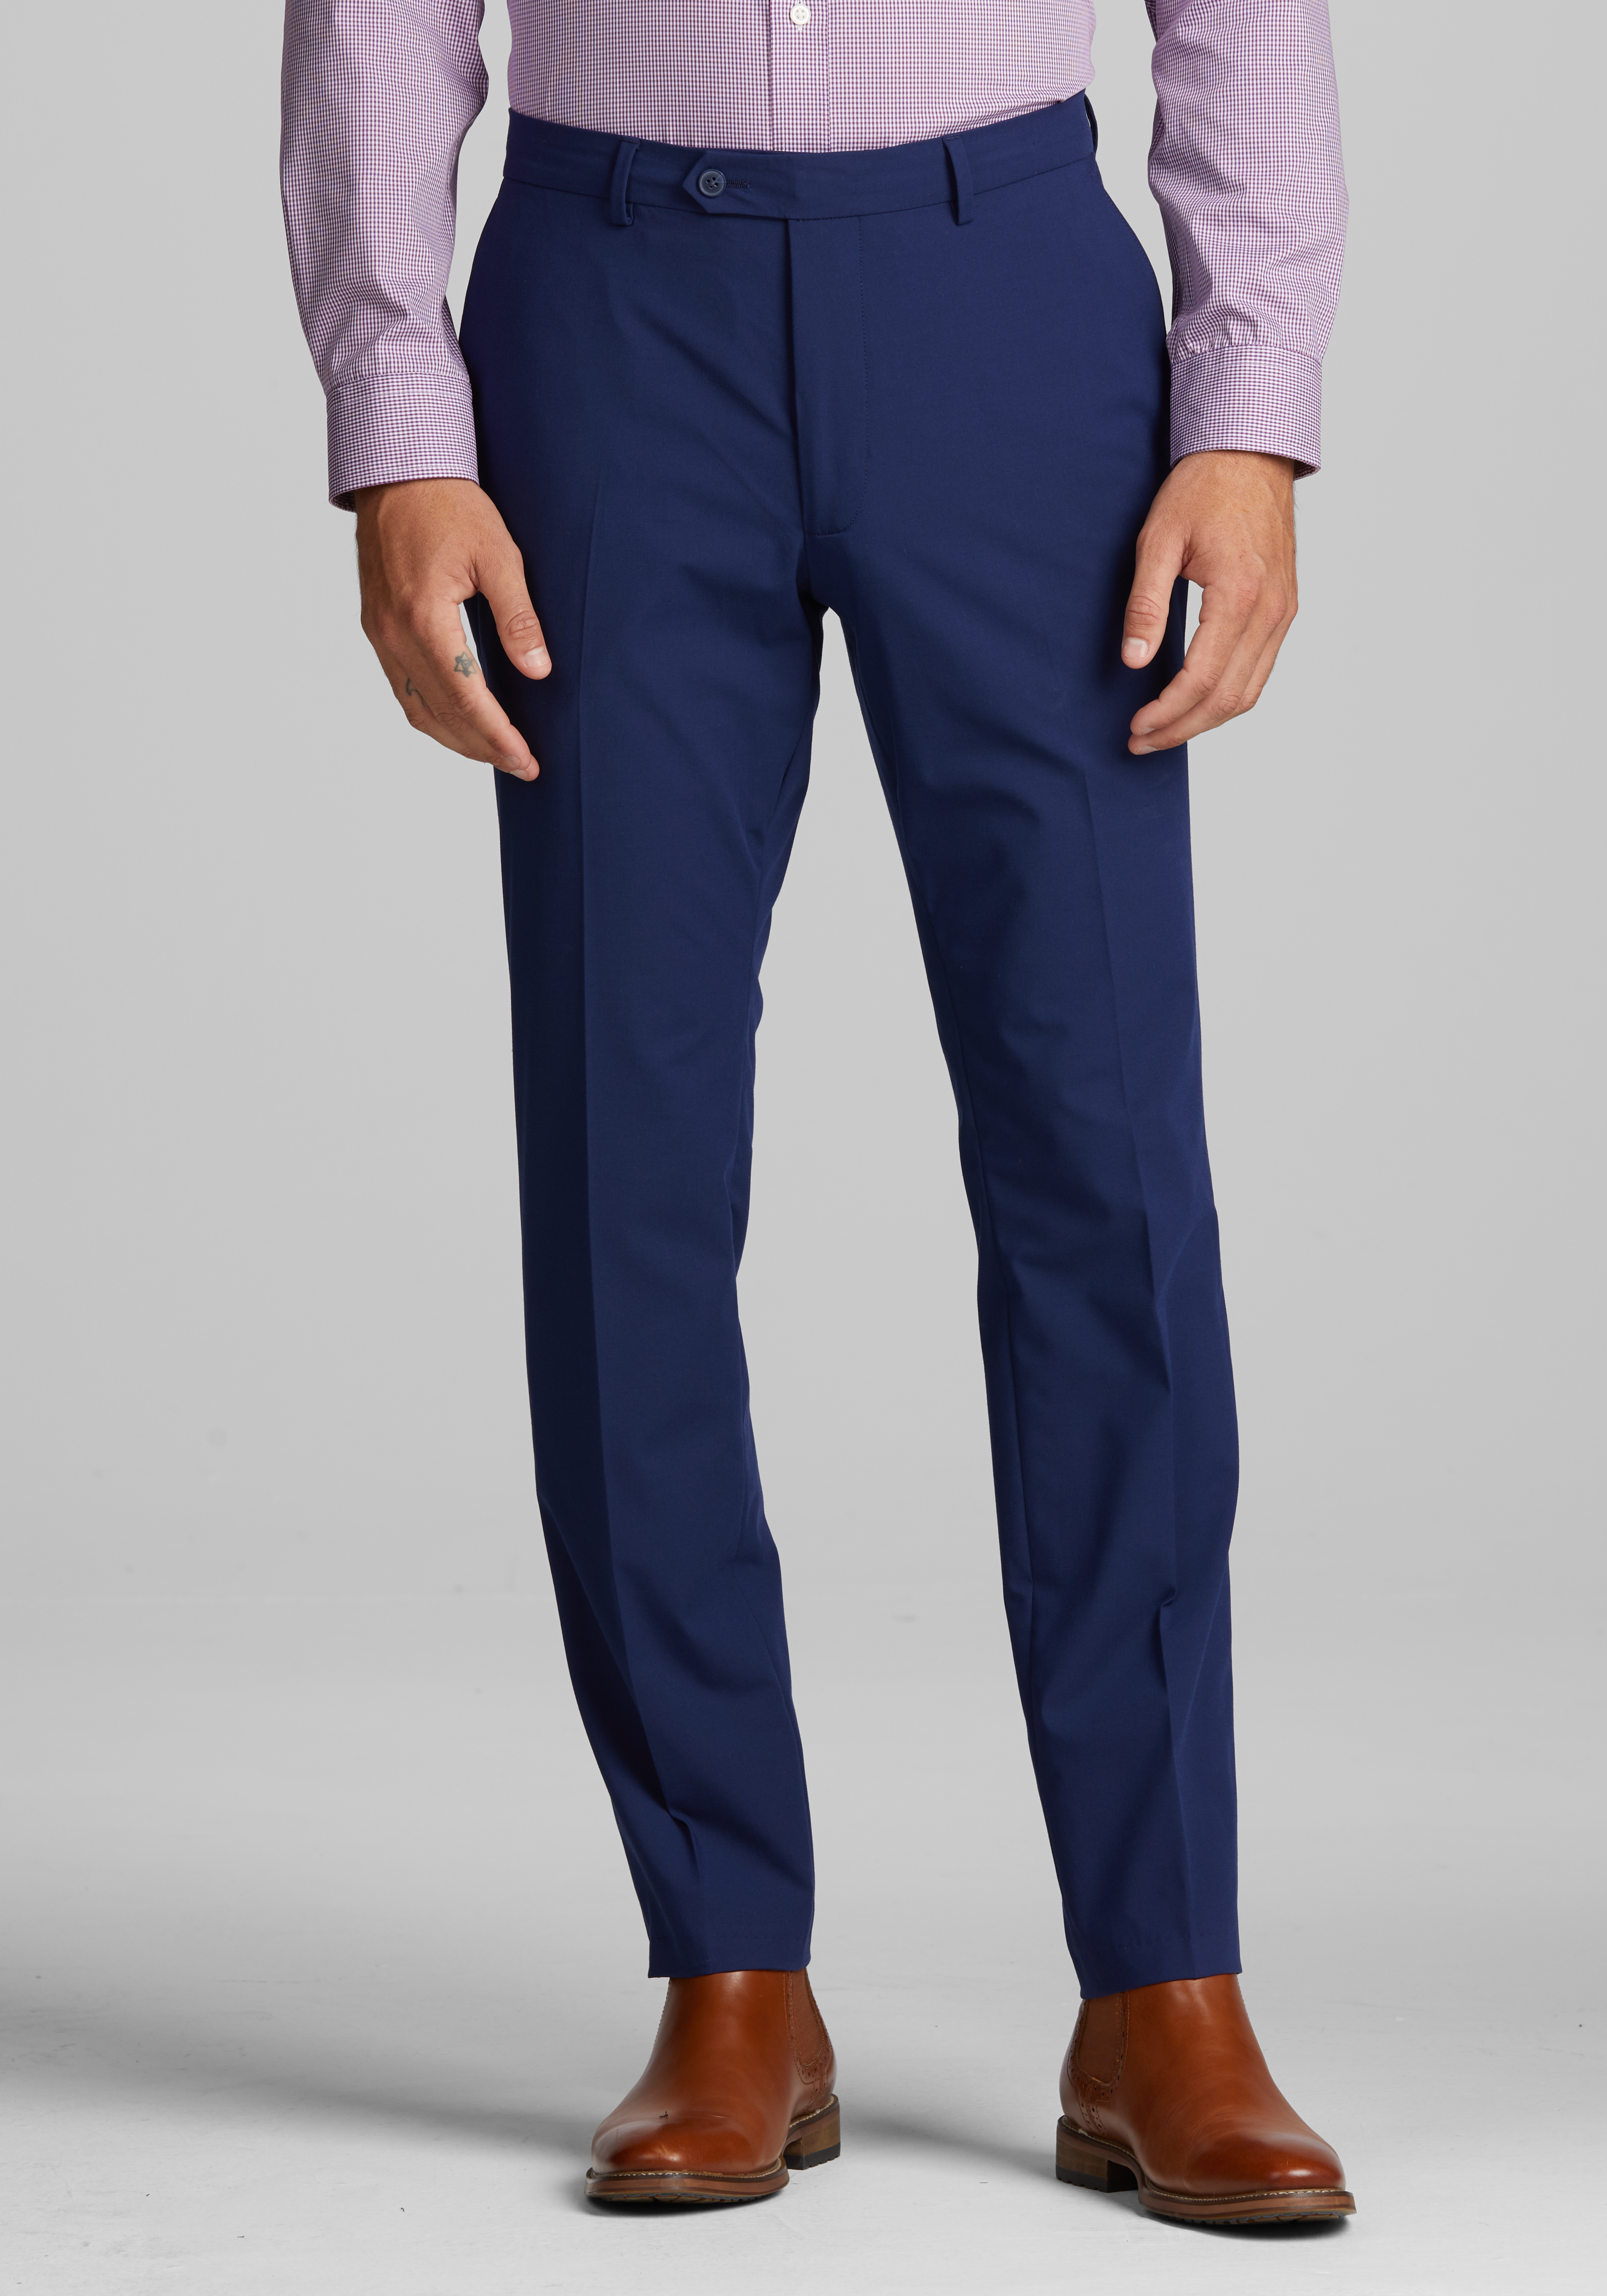 1905 Navy Collection Tailored Fit Suit Separates Pants